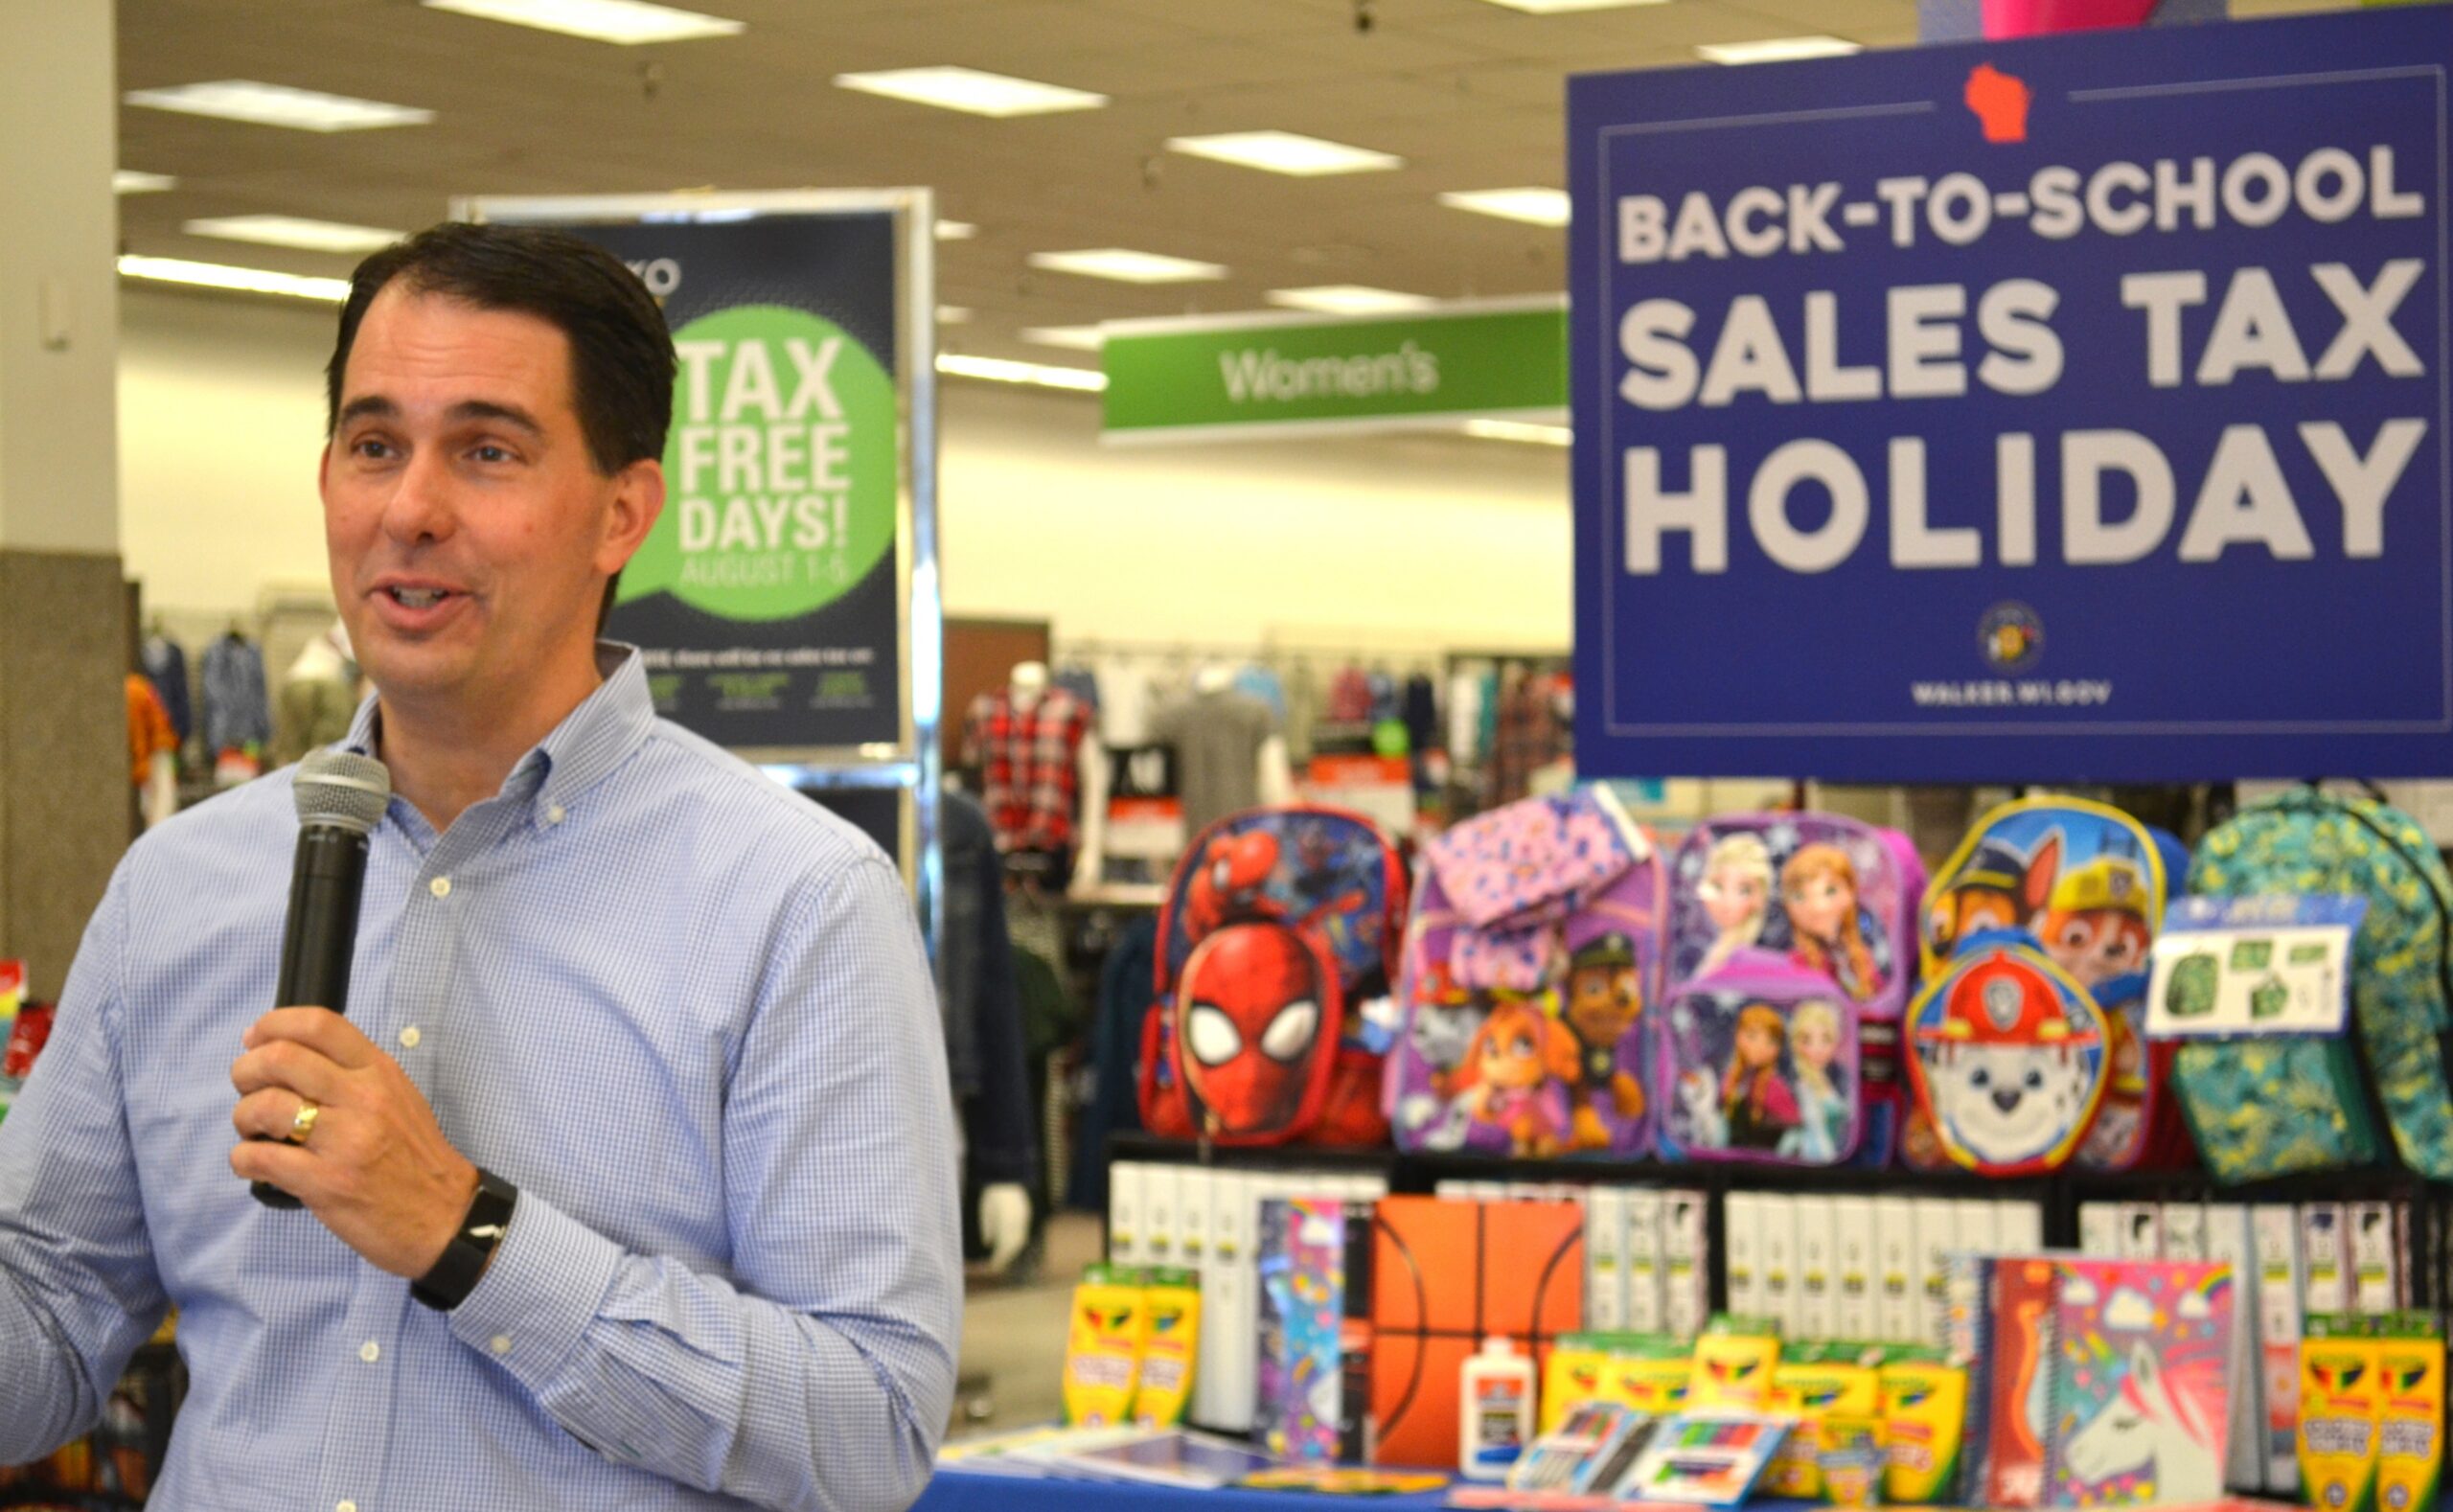 Walker Touts Back-To-School Sales Tax Holiday Starting Wednesday